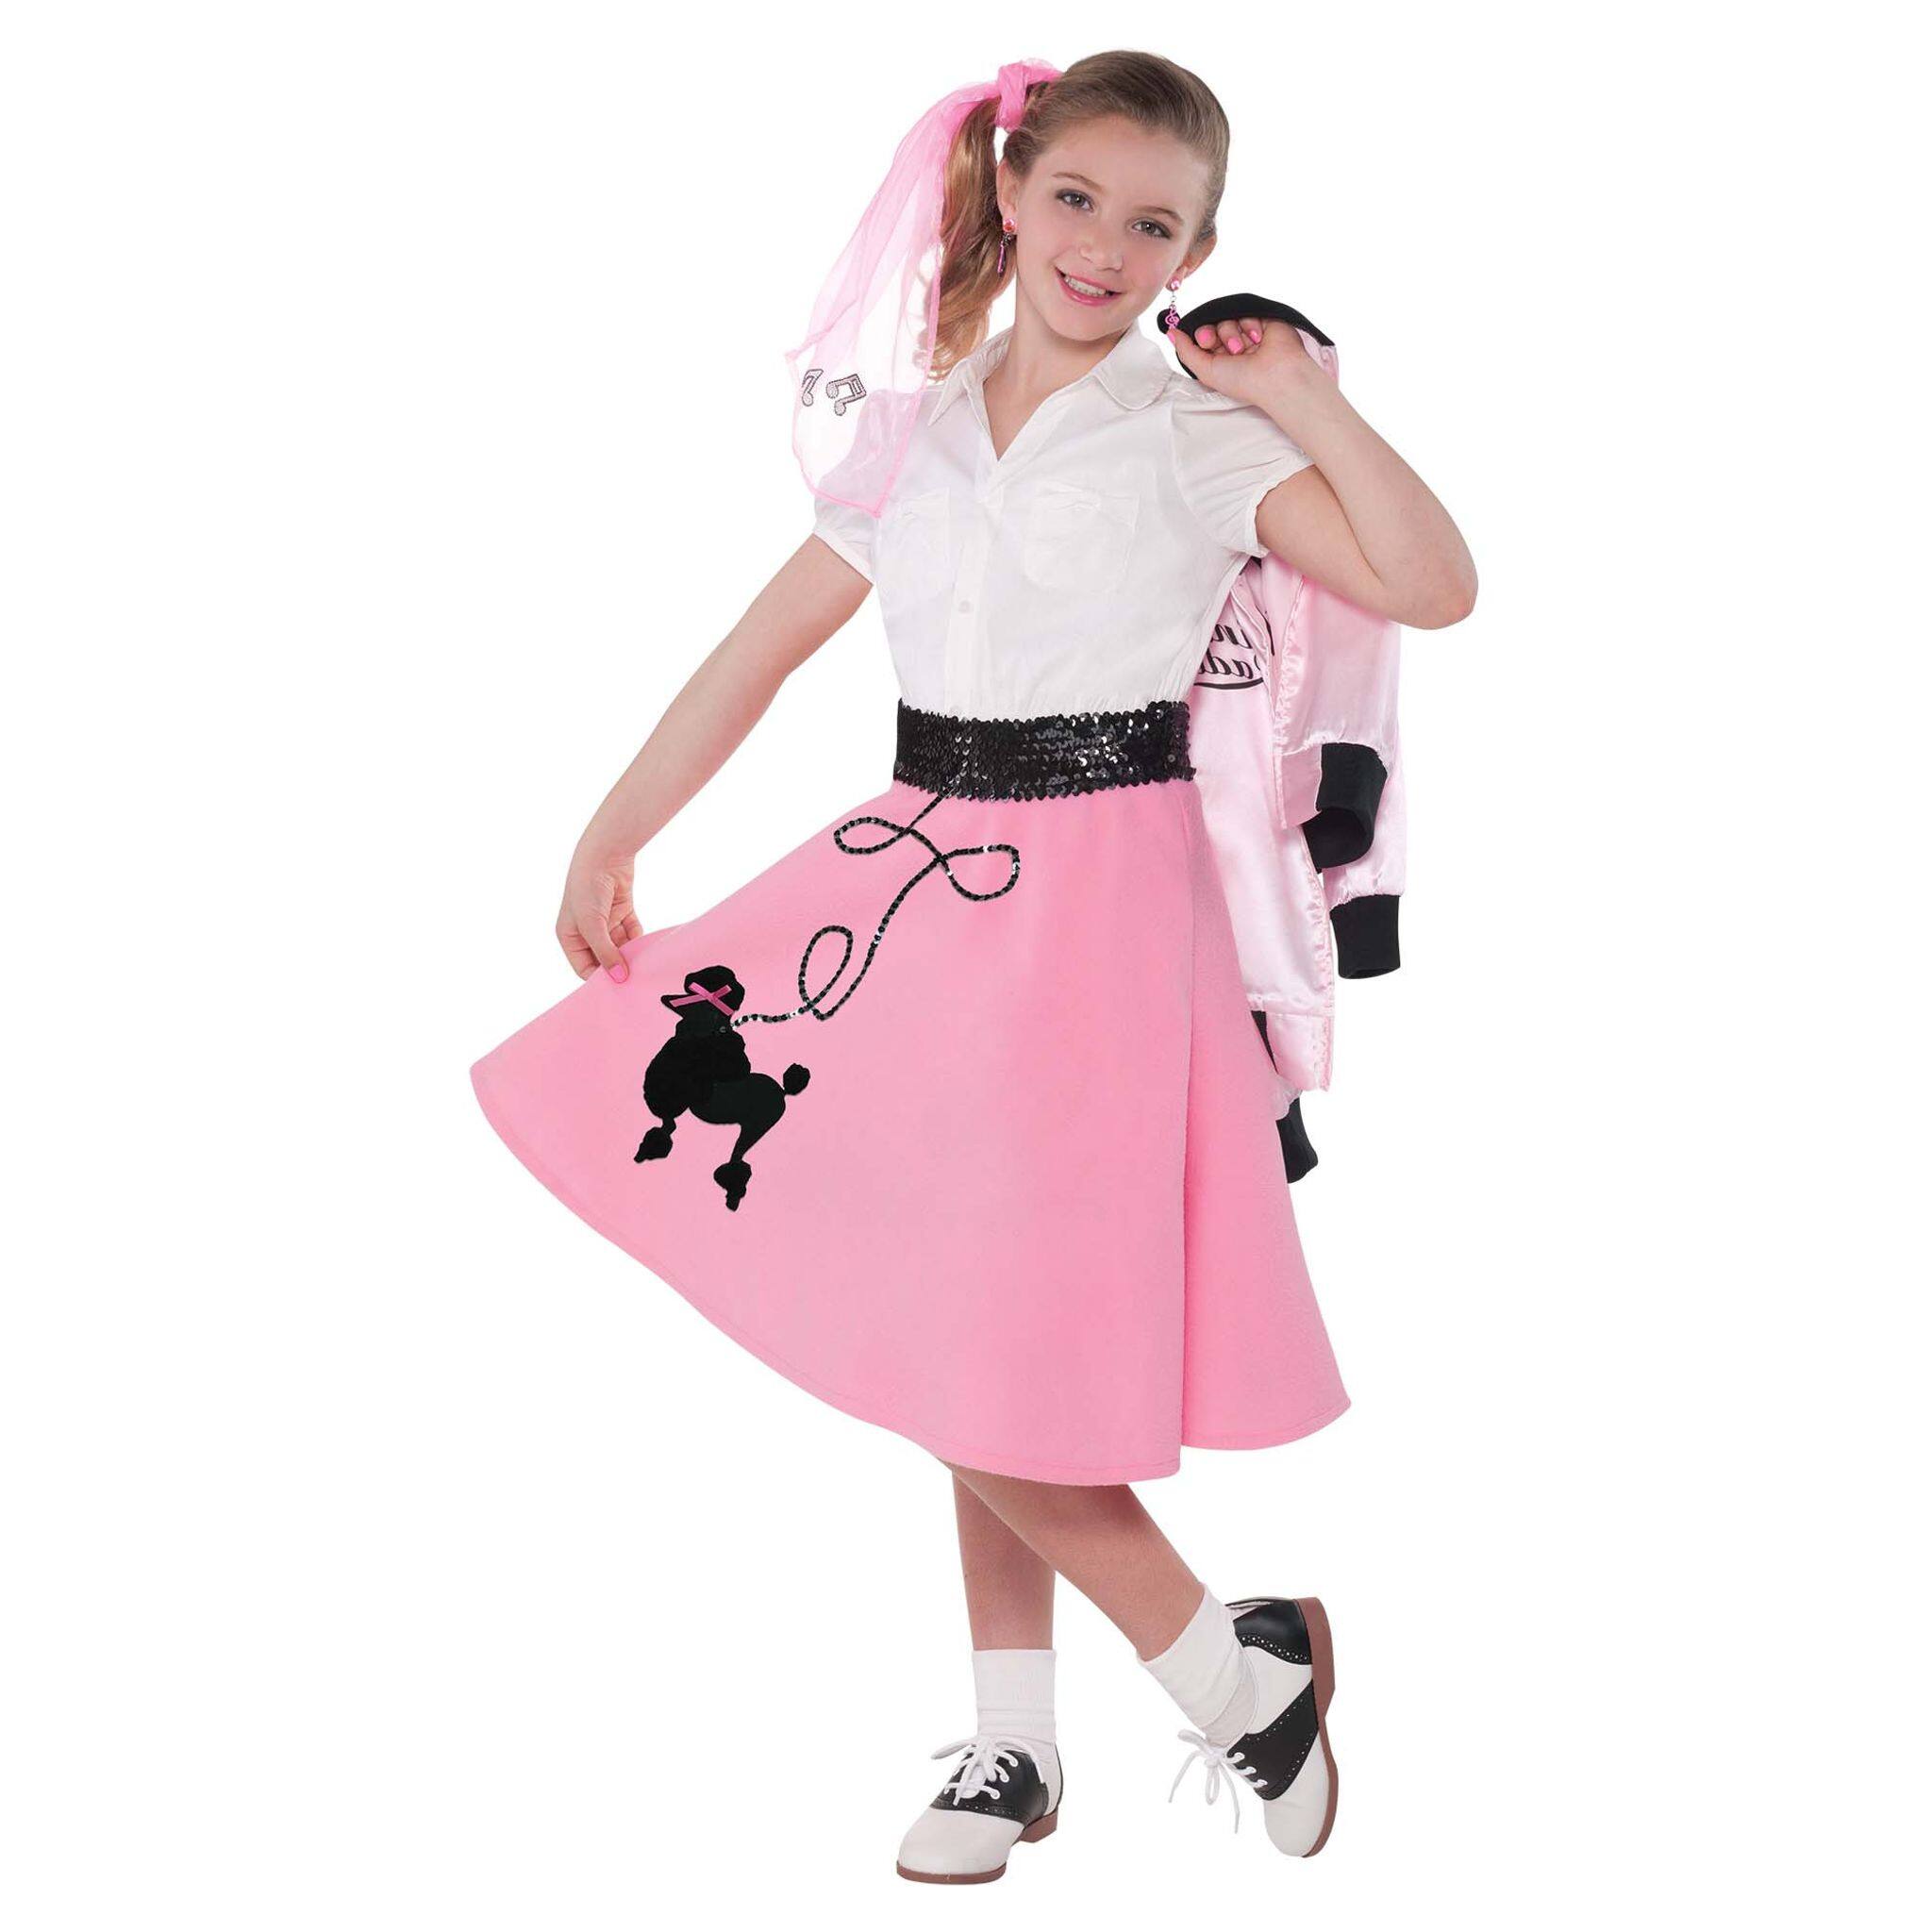 Poodle Skirt Youth Costume